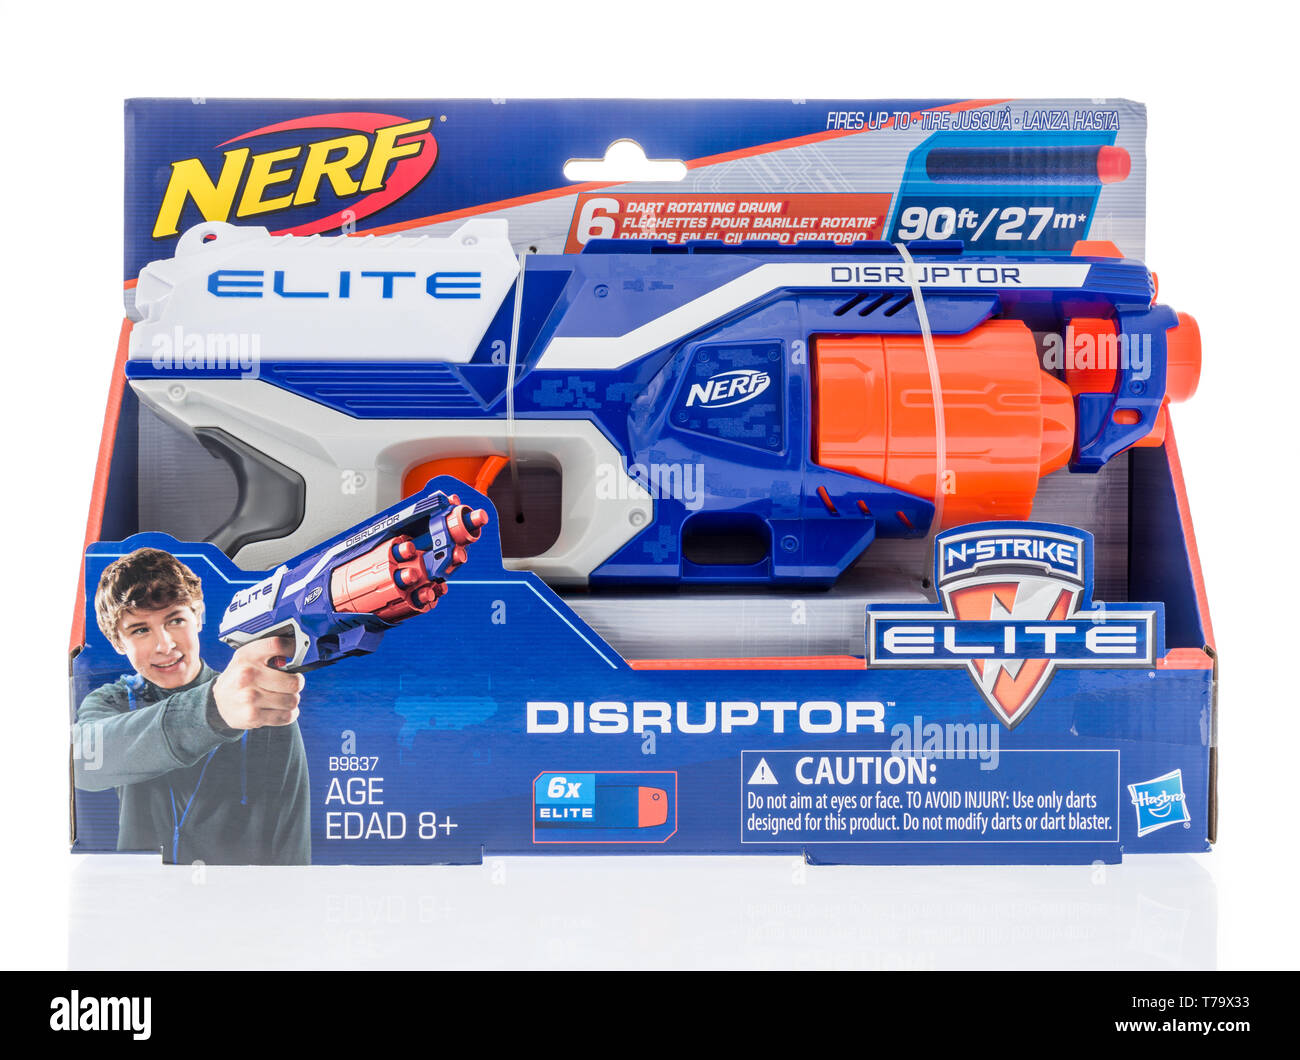 Nerf Toy Gun High Resolution Stock Photography and Images - Alamy